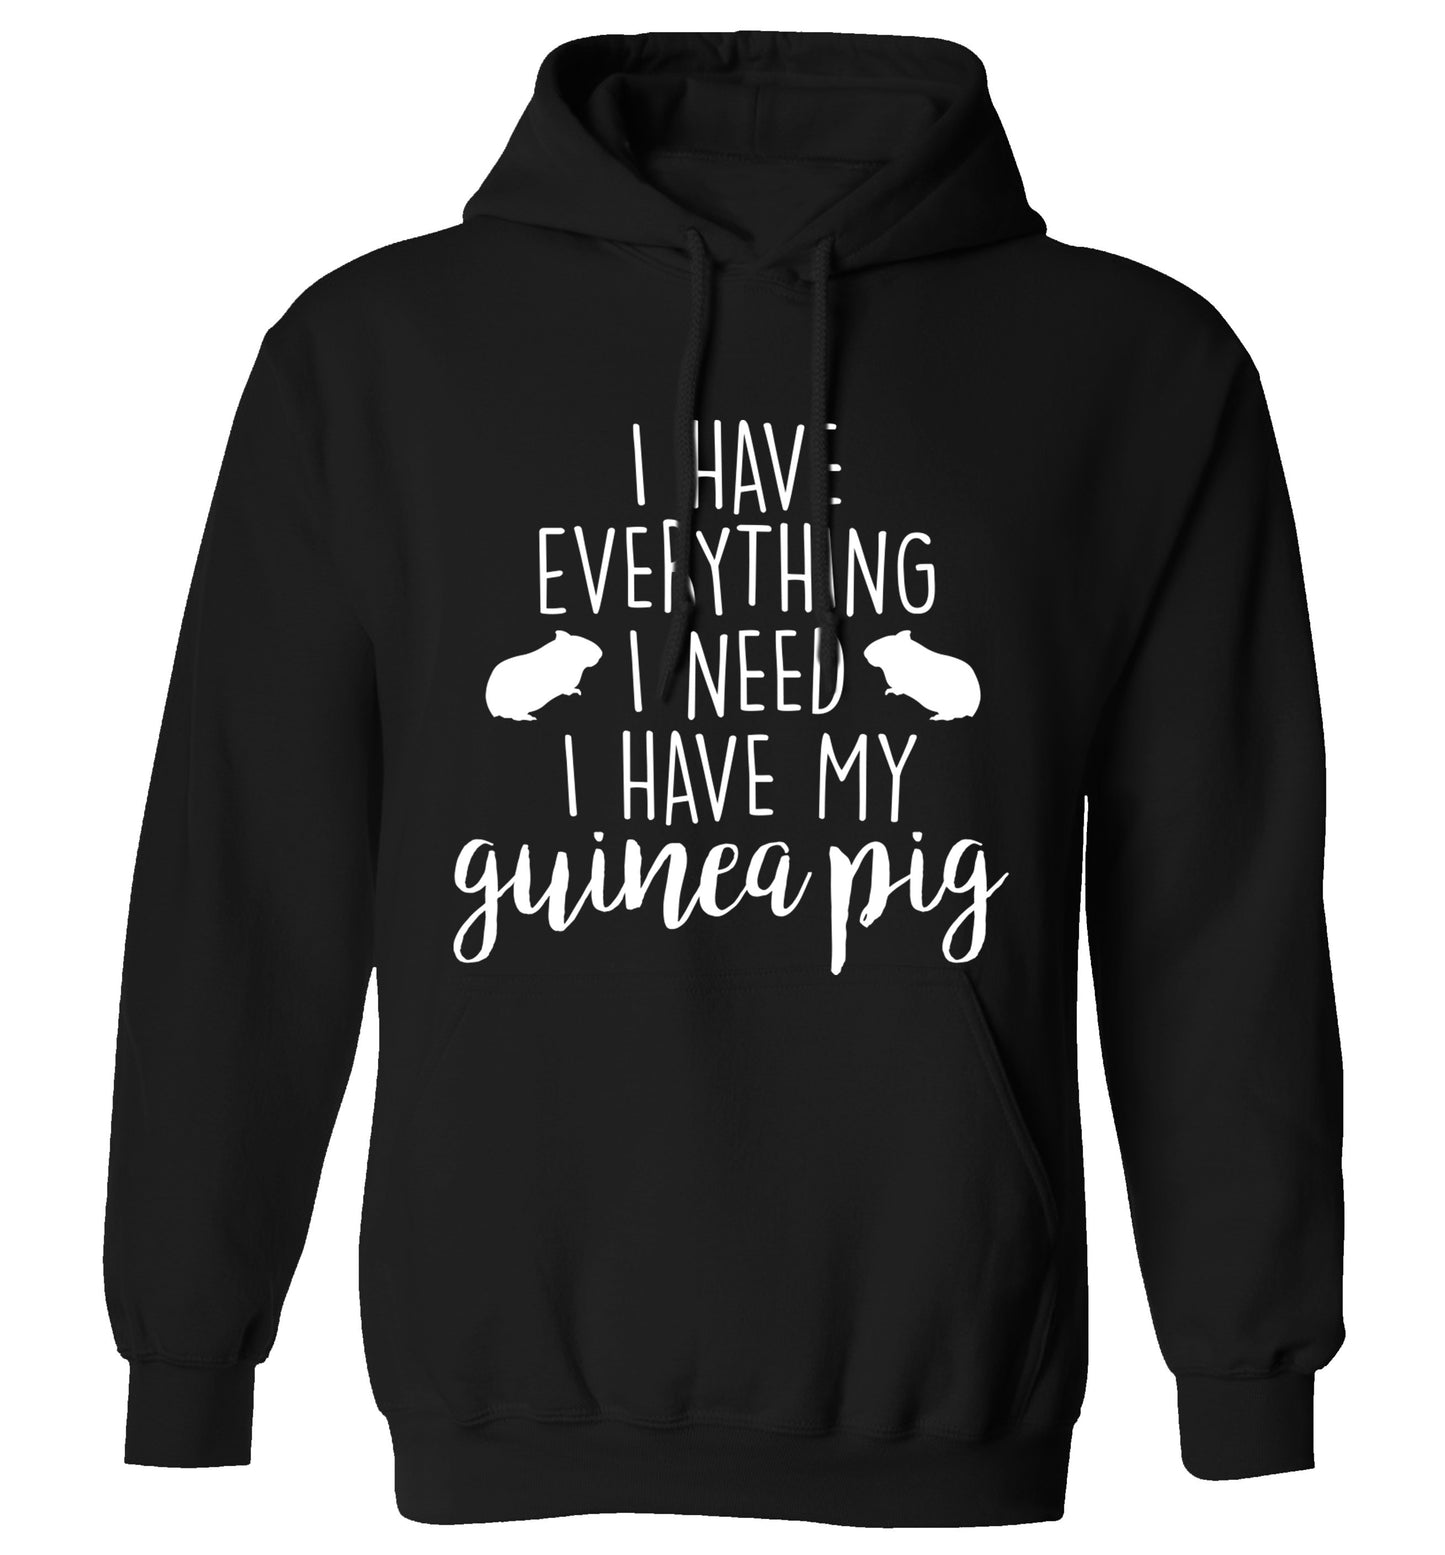 I have everything I need, I have my guinea pig adults unisex black hoodie 2XL